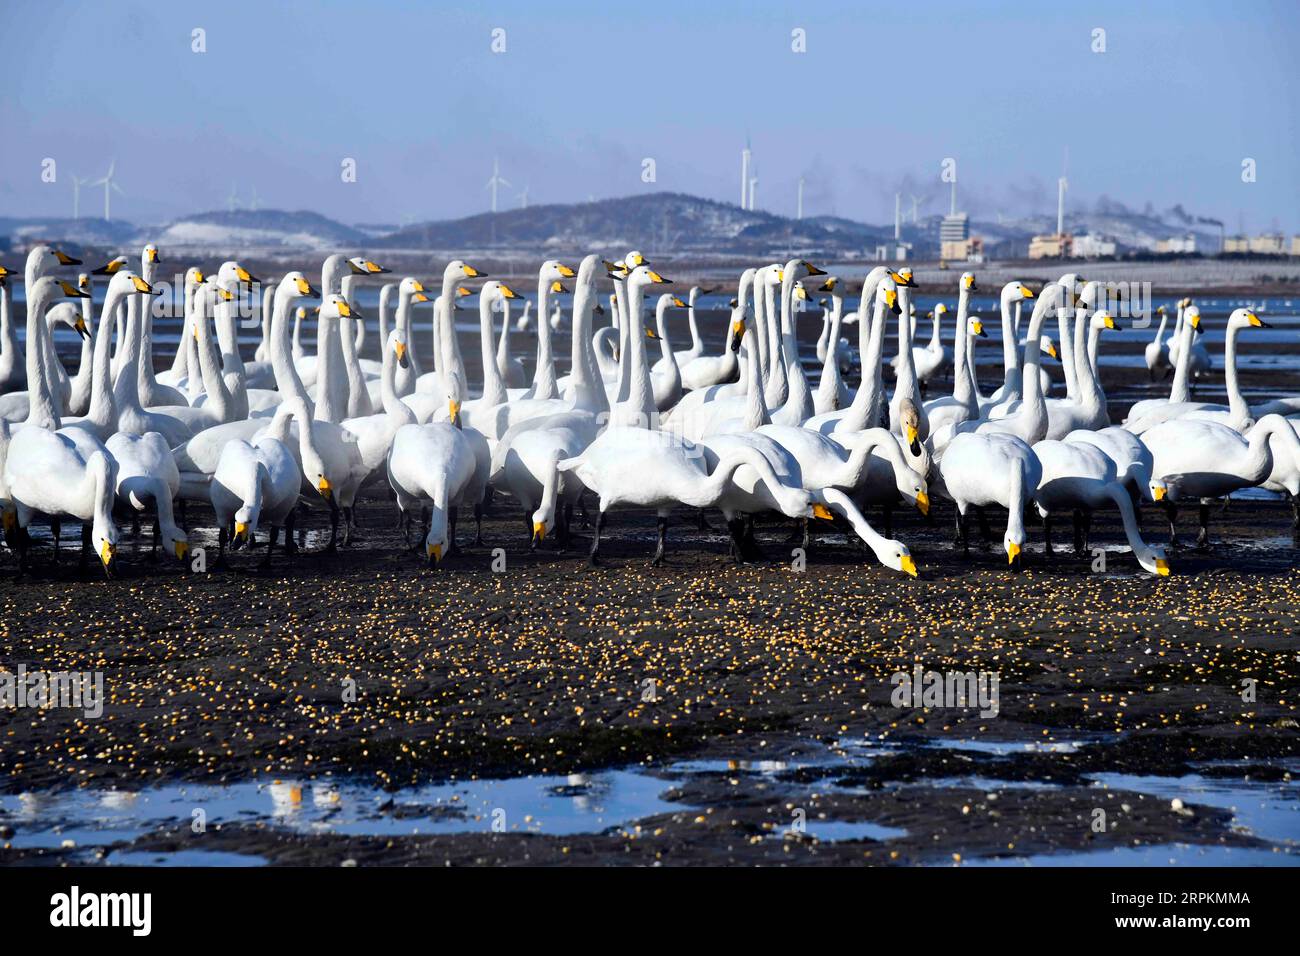 200114 -- RONGCHENG, Jan. 14, 2020 -- Whooper swans are fed with corns at Swan Lake Managerial Station in the national nature reserve for whooper swans in Rongcheng City, east China s Shandong Province, Jan. 11, 2020. Come, come to eat Liu Zhibin and his wife Zhao Shuzhi called whooper swans while blowing their whistles. Every year from November to March of the following year, these whooper swans fly from Siberia to Rongcheng City, east China s Shandong Province, to spend the winter. After retiring in 2015, the Lius came to Rongcheng City from Qiqihar City, northeast China s Heilongjiang Provi Stock Photo